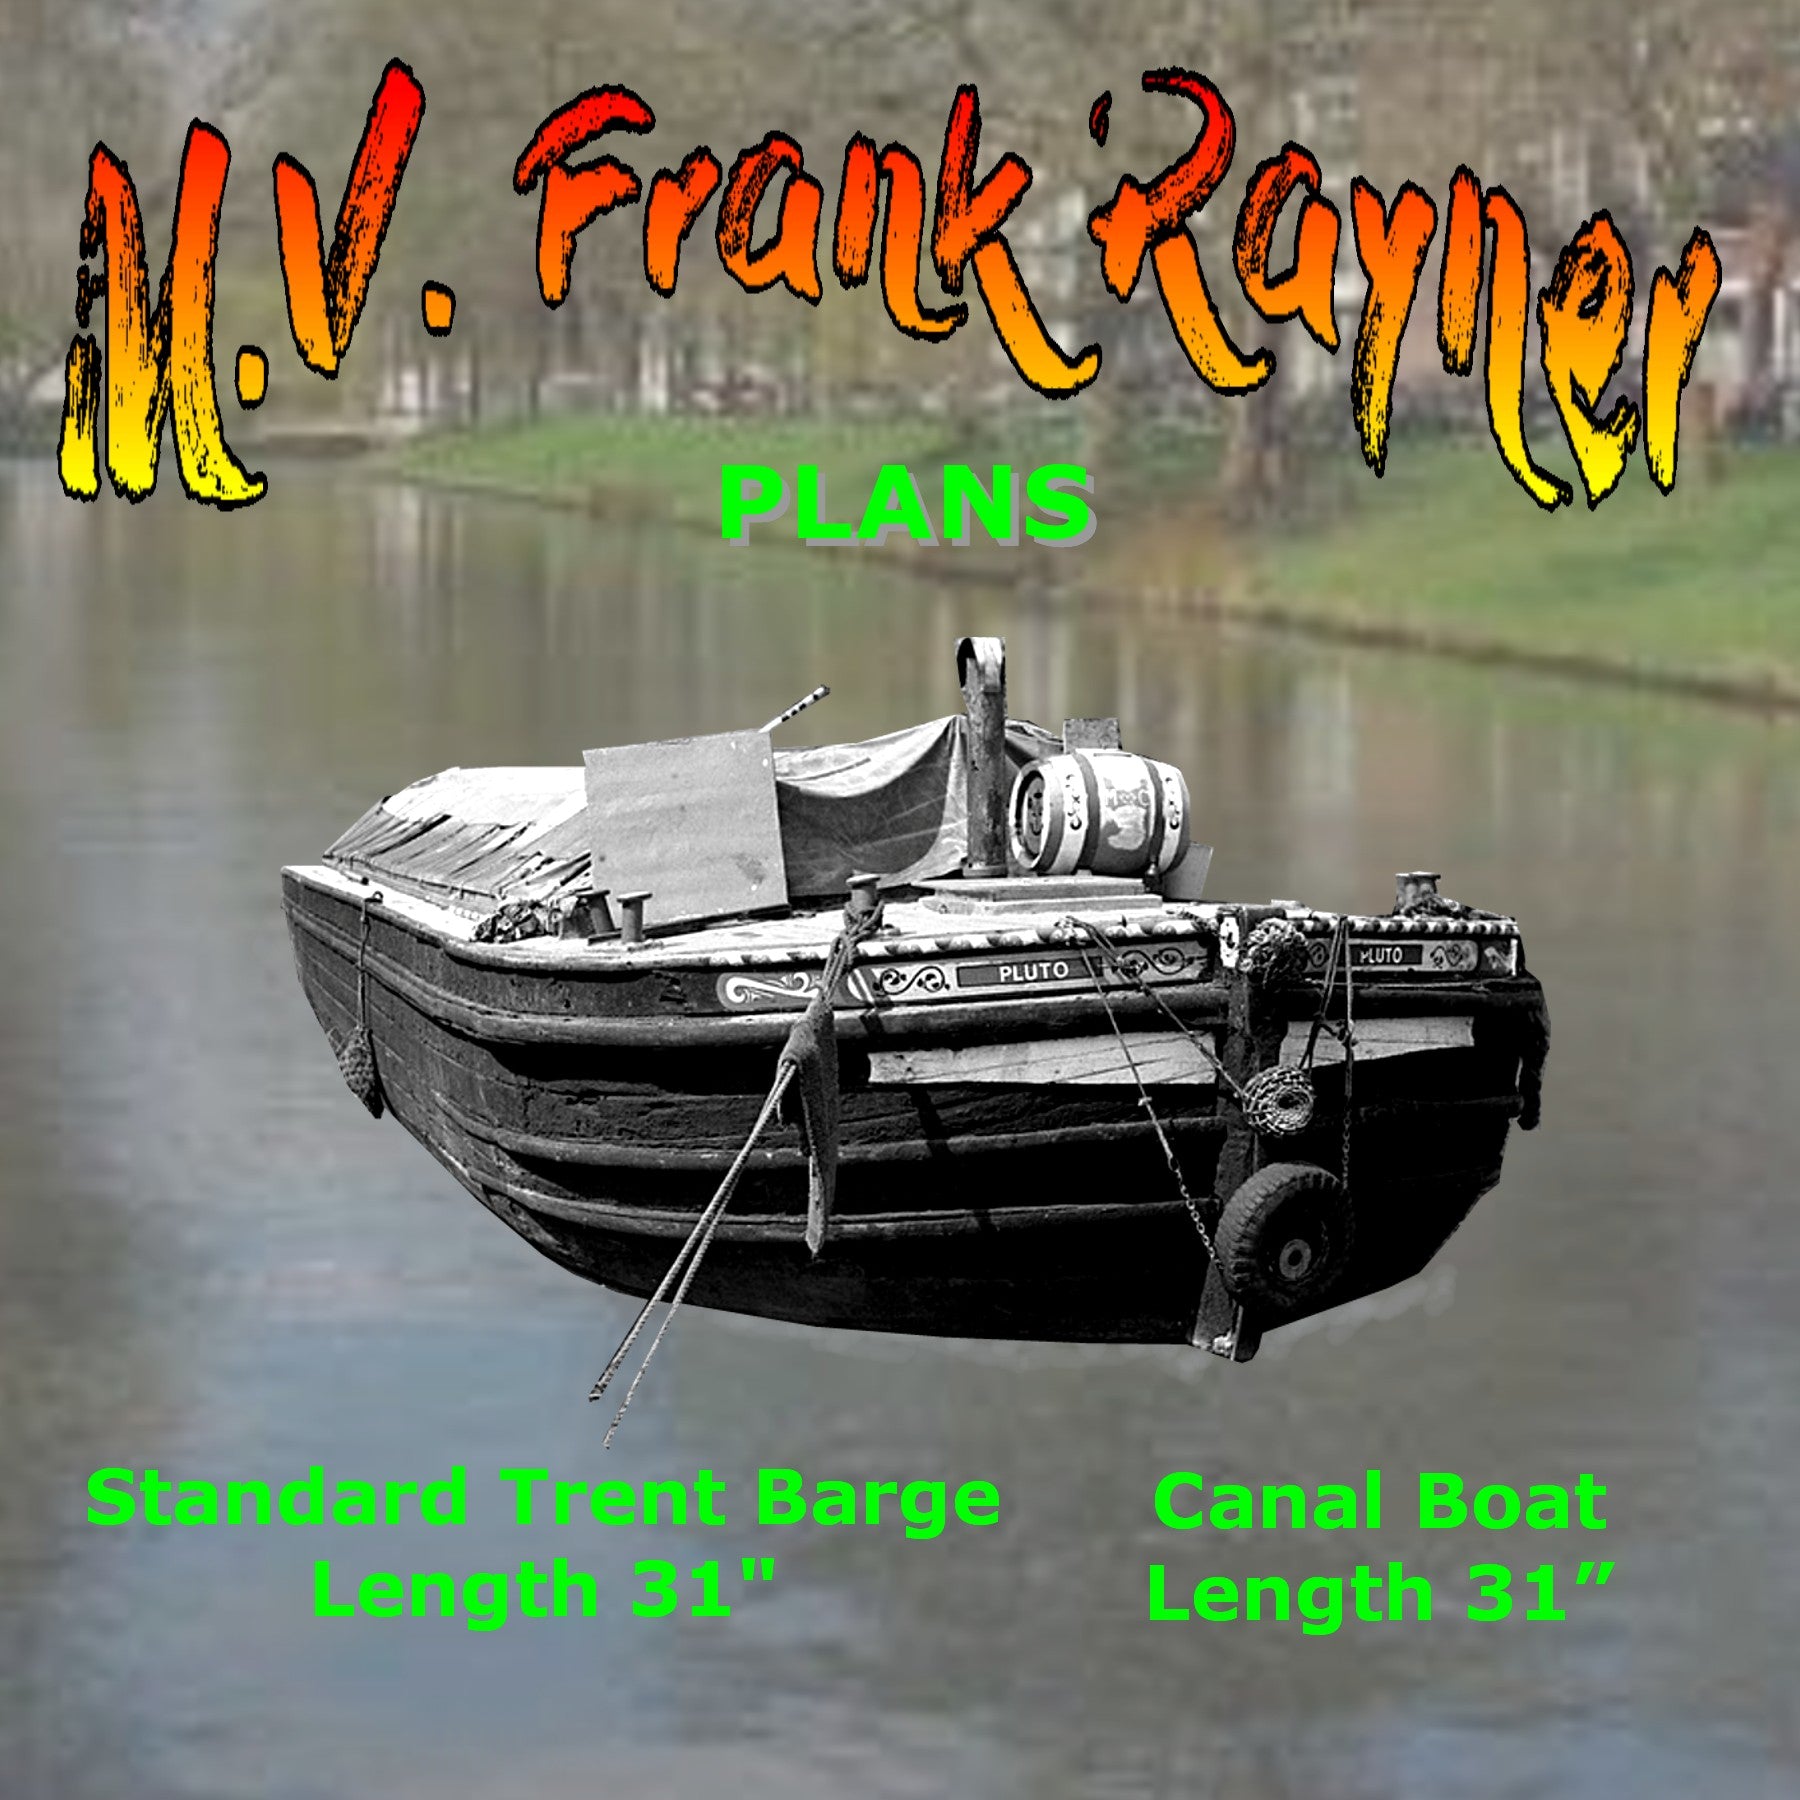 full size printed plan canal boat & trent barge m.v. frank rayner suitable for radio control